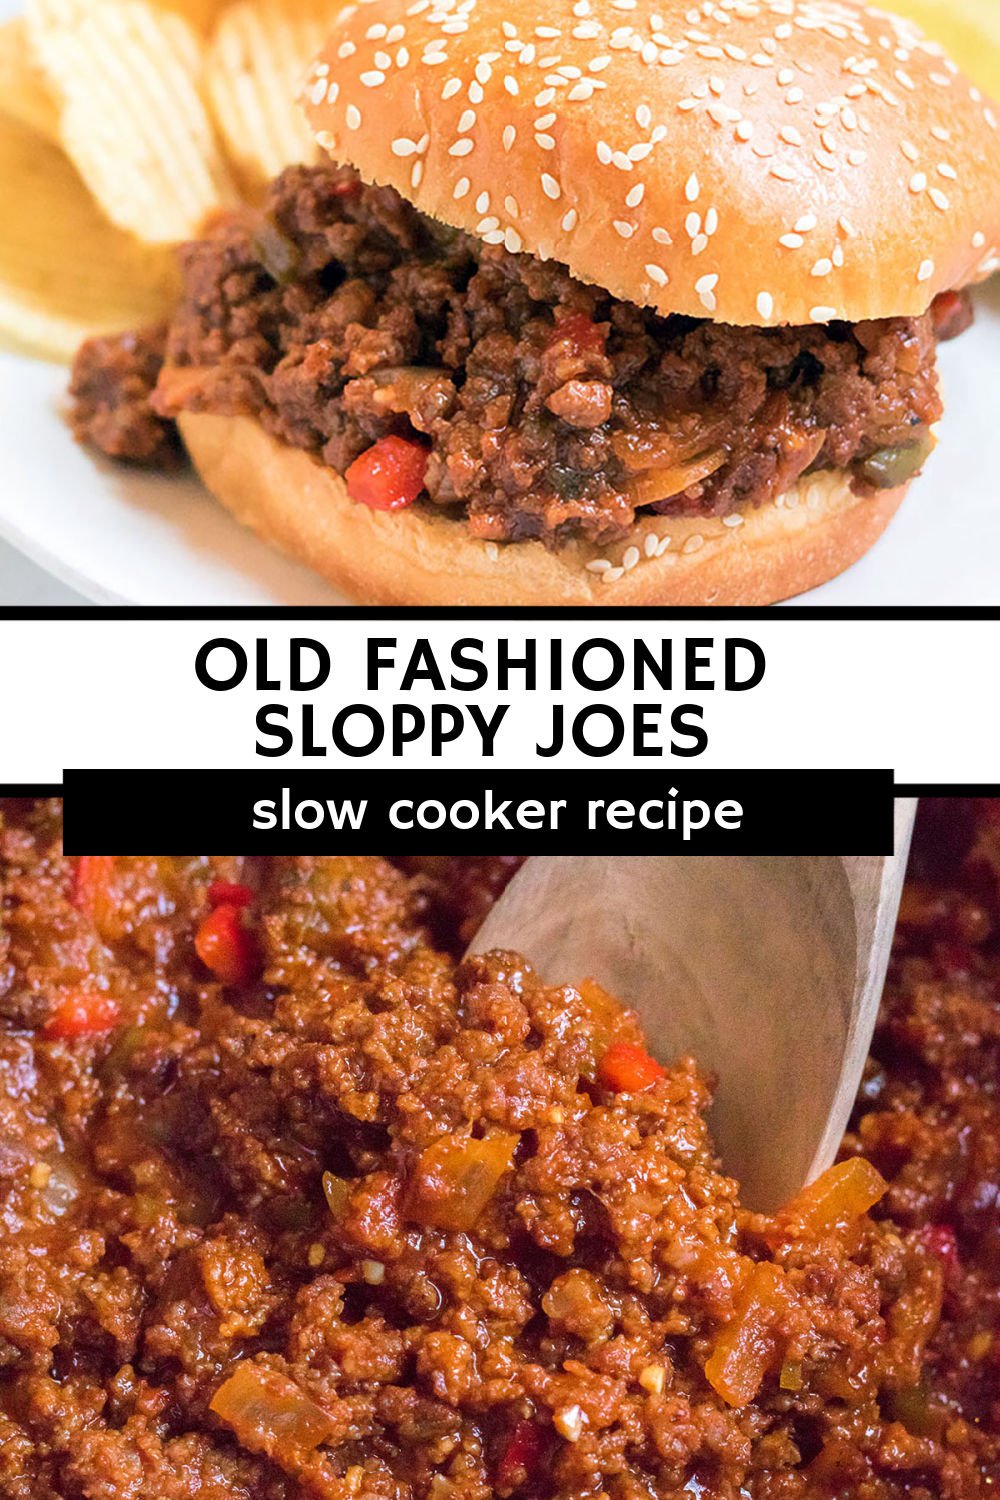 This old fashioned sloppy joes recipe is made extra easy in the slow cooker! The meat mixture slow cooks for hours and then is ready to pile onto a bun. This easy recipe is perfect for the whole family and makes enough for a crowd. | www.persnicketyplates.com